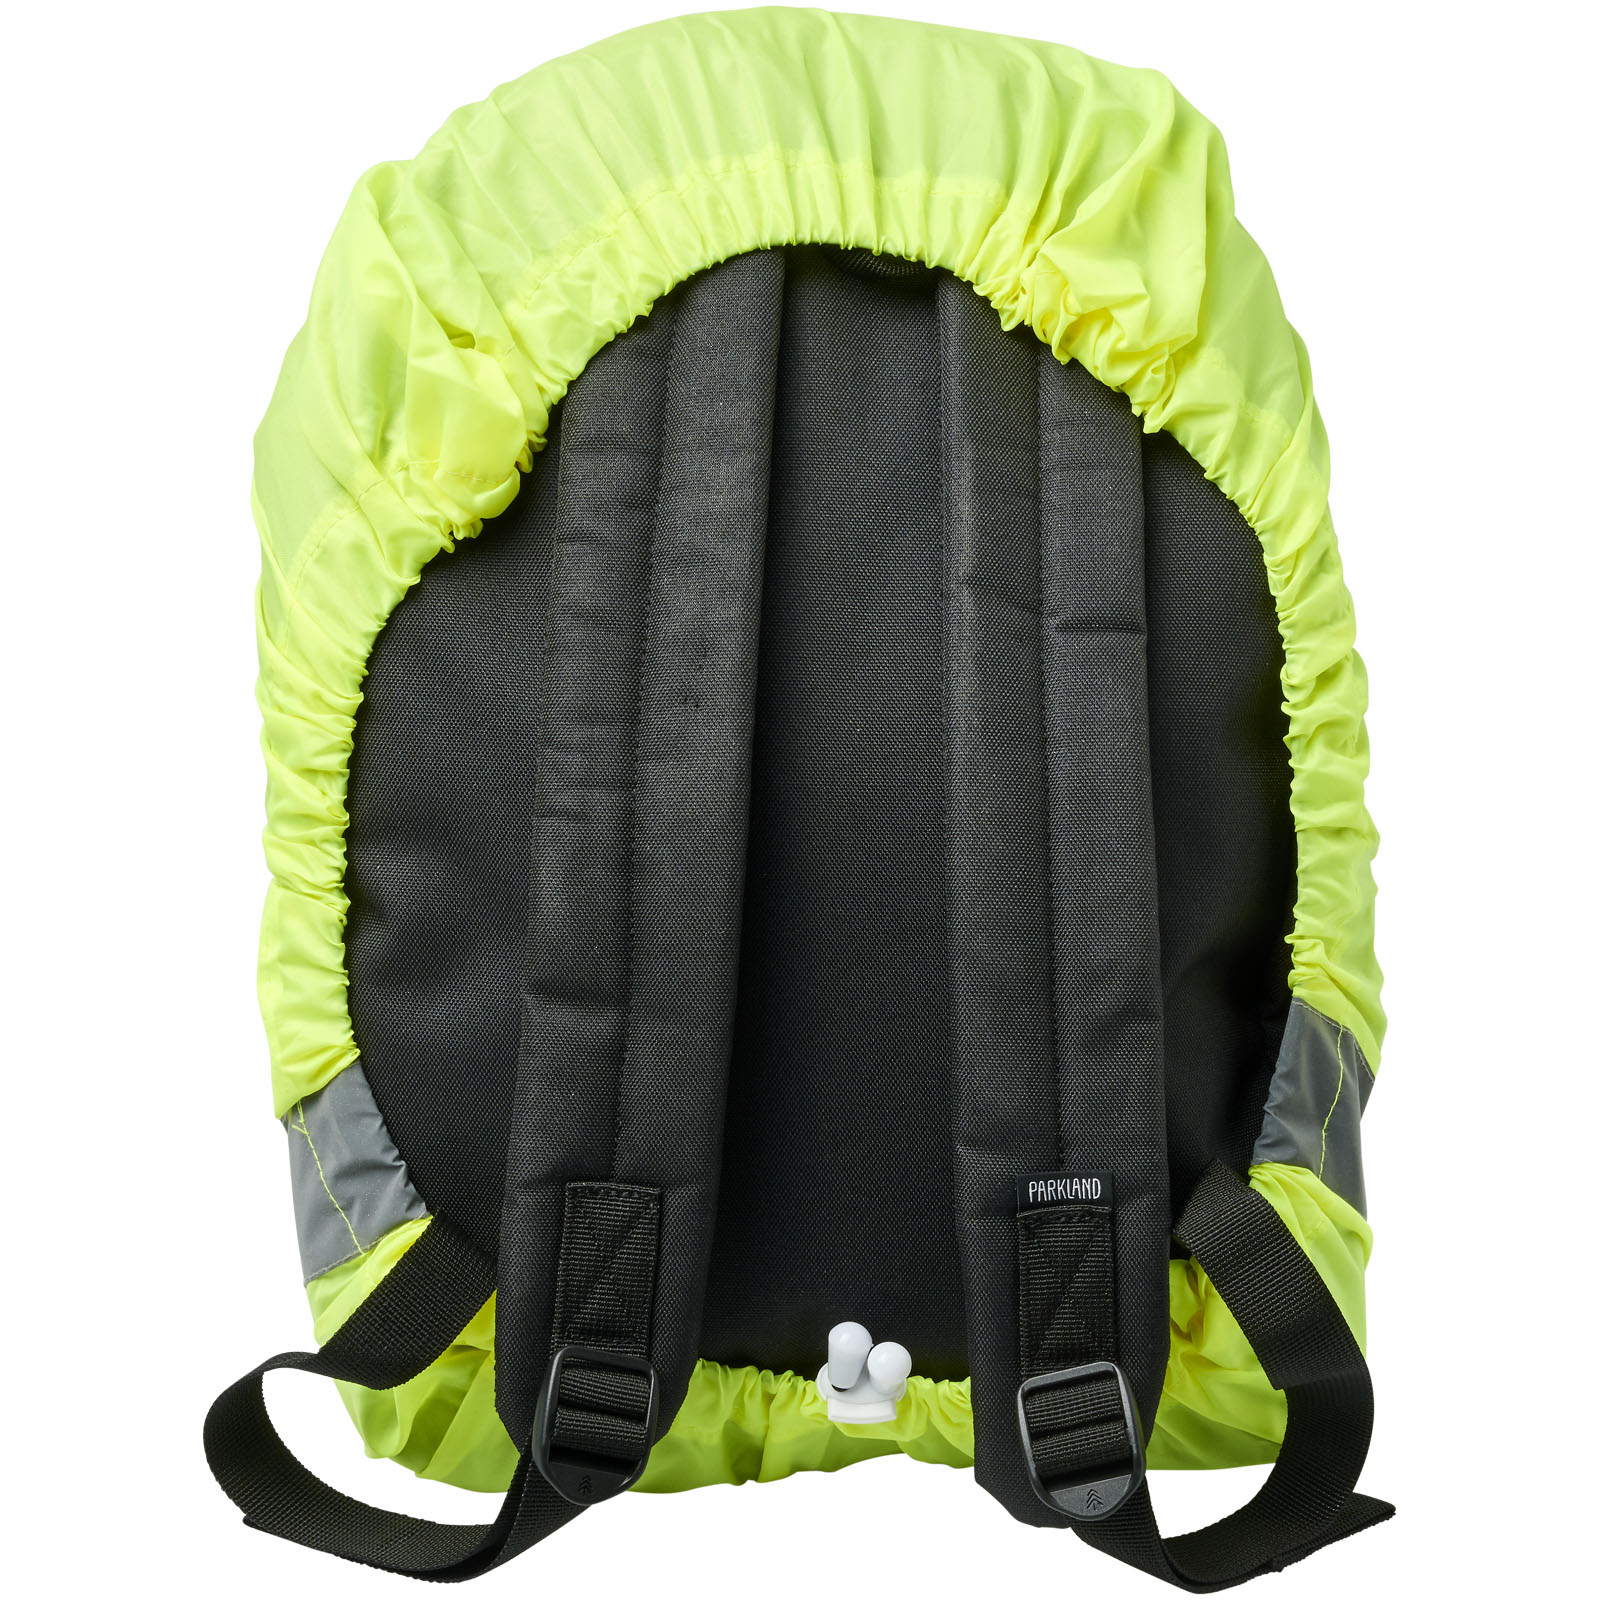 Advertising Reflective Items - RFX™ William reflective and waterproof bag cover - 2